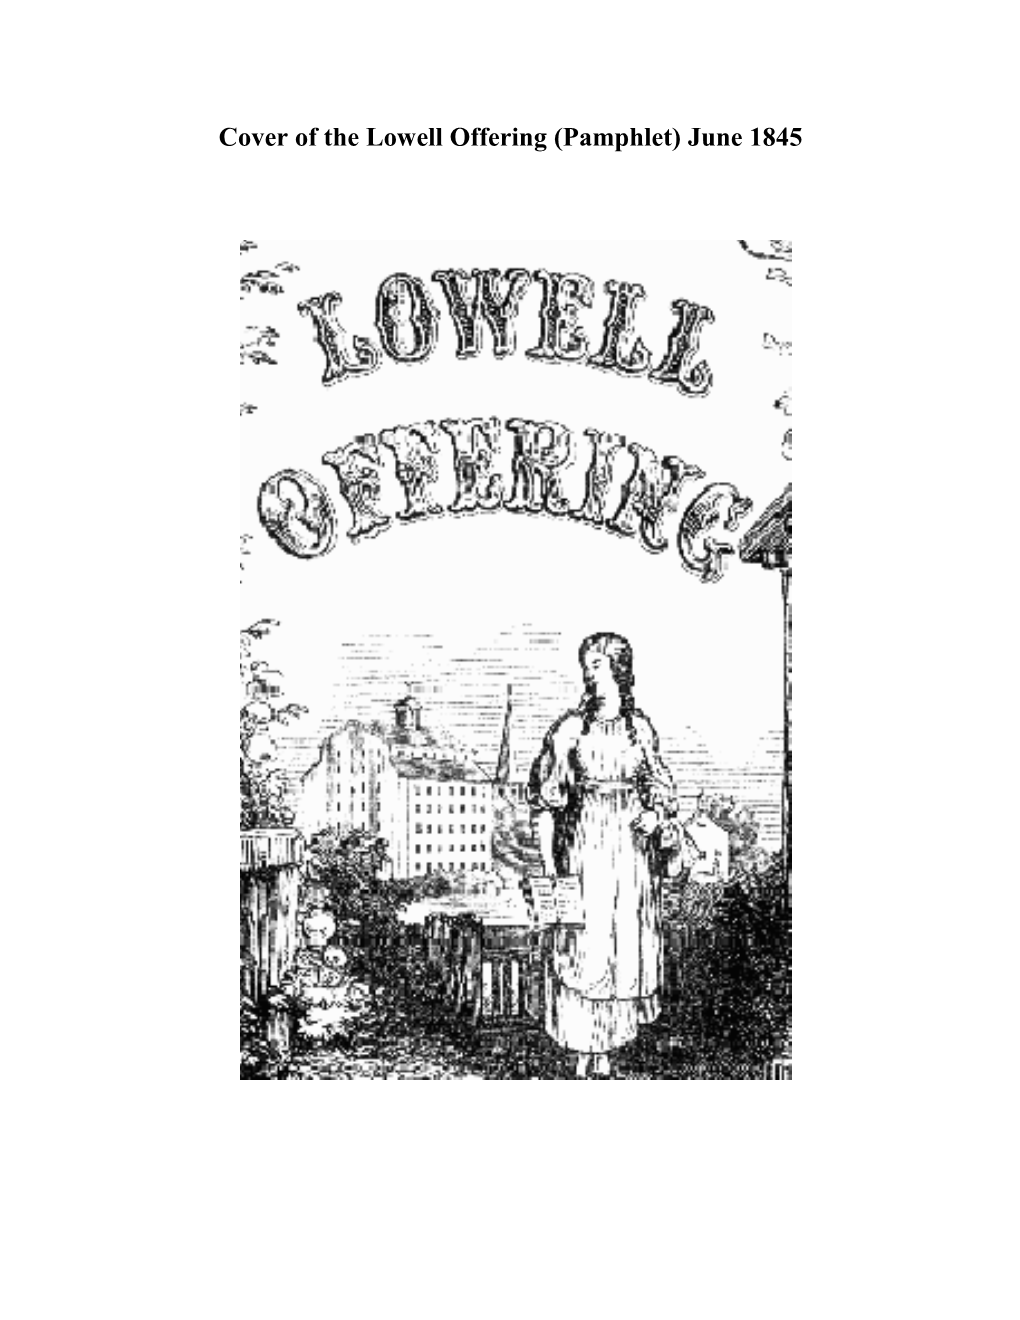 Cover of the Lowell Offering (Pamphlet) June 1845